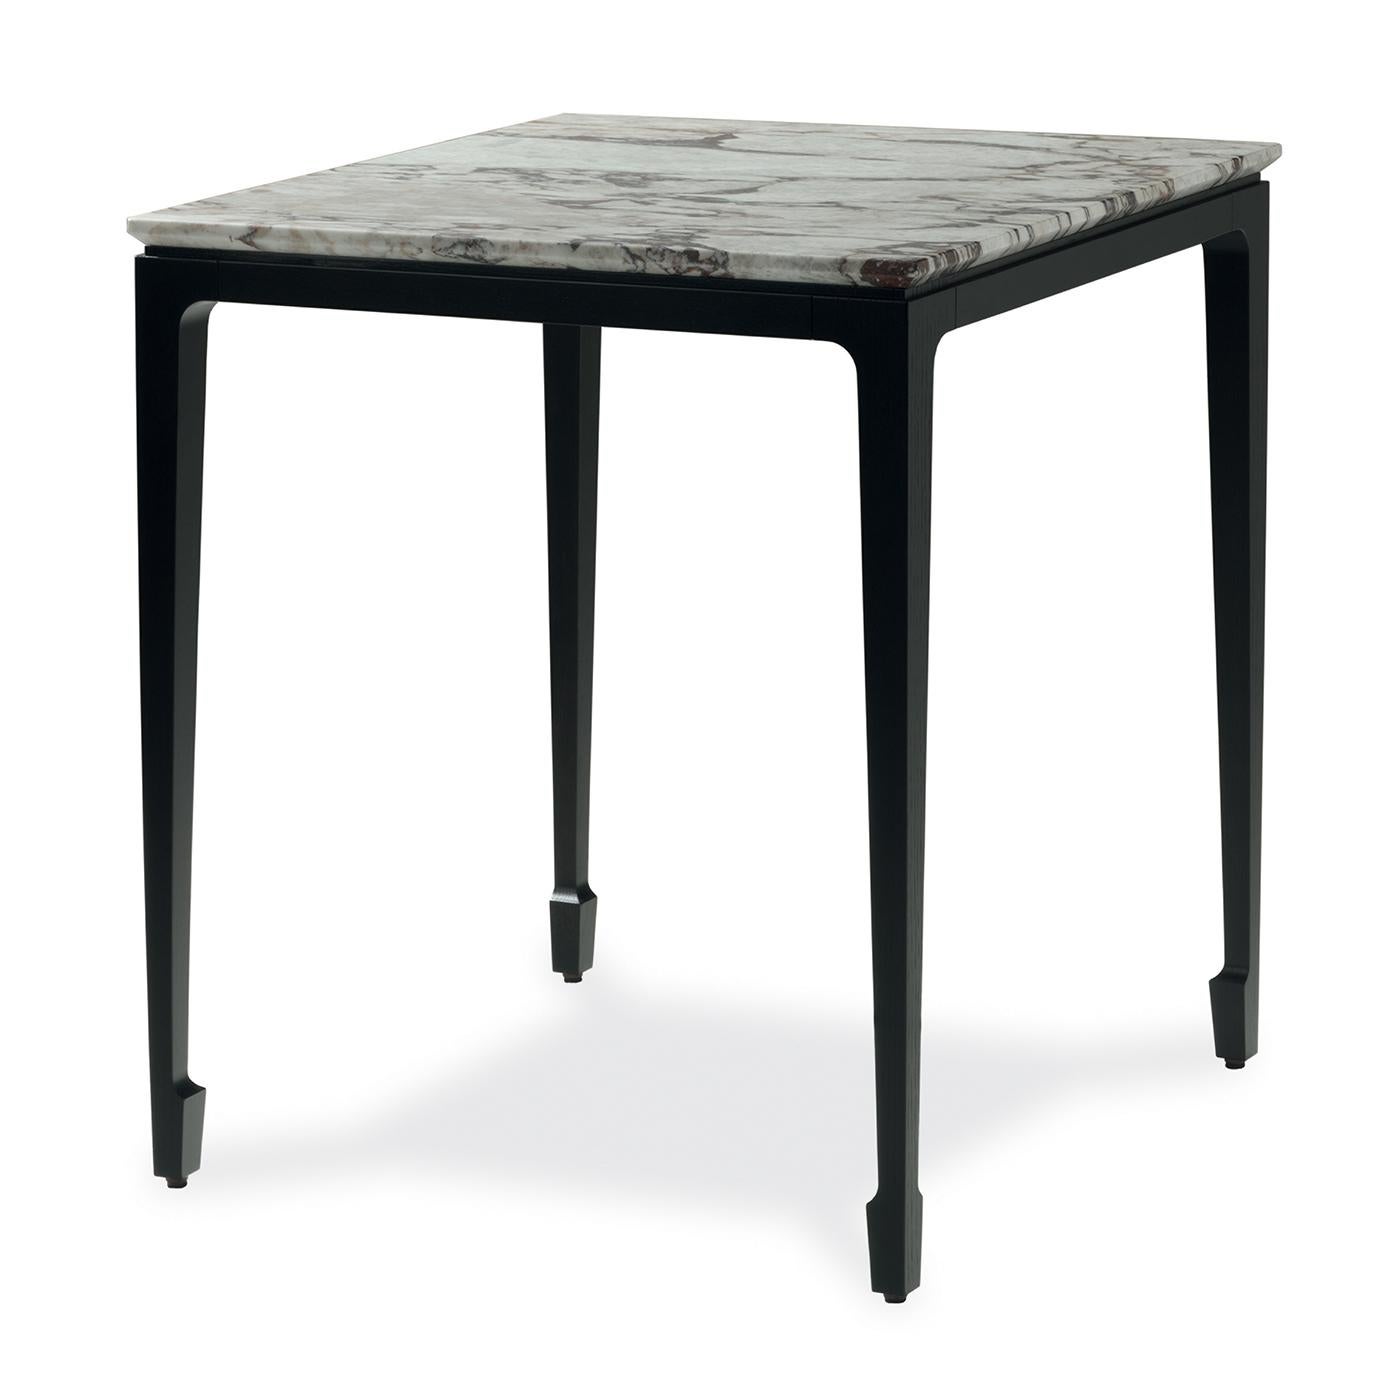 Part of the Yang collection of side tables, this piece is a stunning addition to a modern home. Either alone or combined with the others in black or durmast finish, this side table will be an elegant display surface for collectibles, a practical